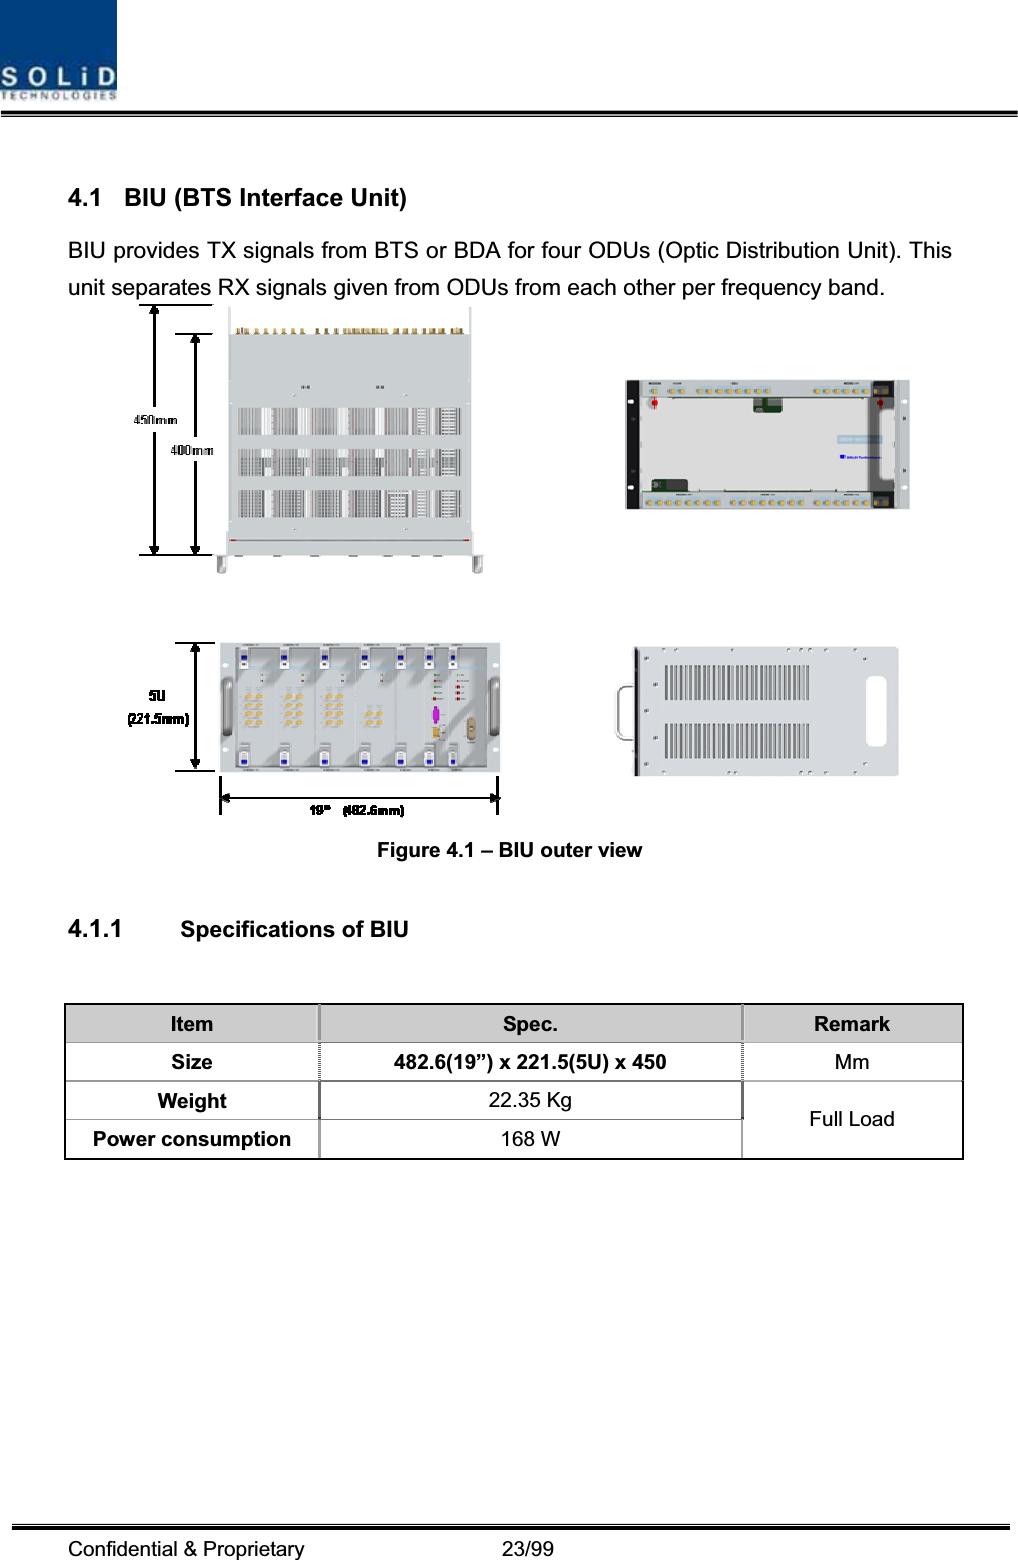 Confidential &amp; Proprietary                   23/99 4.1  BIU (BTS Interface Unit) BIU provides TX signals from BTS or BDA for four ODUs (Optic Distribution Unit). This unit separates RX signals given from ODUs from each other per frequency band. Figure 4.1 – BIU outer view 4.1.1 Specifications of BIU Item Spec.  Remark Size  482.6(19”) x 221.5(5U) x 450 MmWeight  22.35 Kg Power consumption  168 W  Full Load 